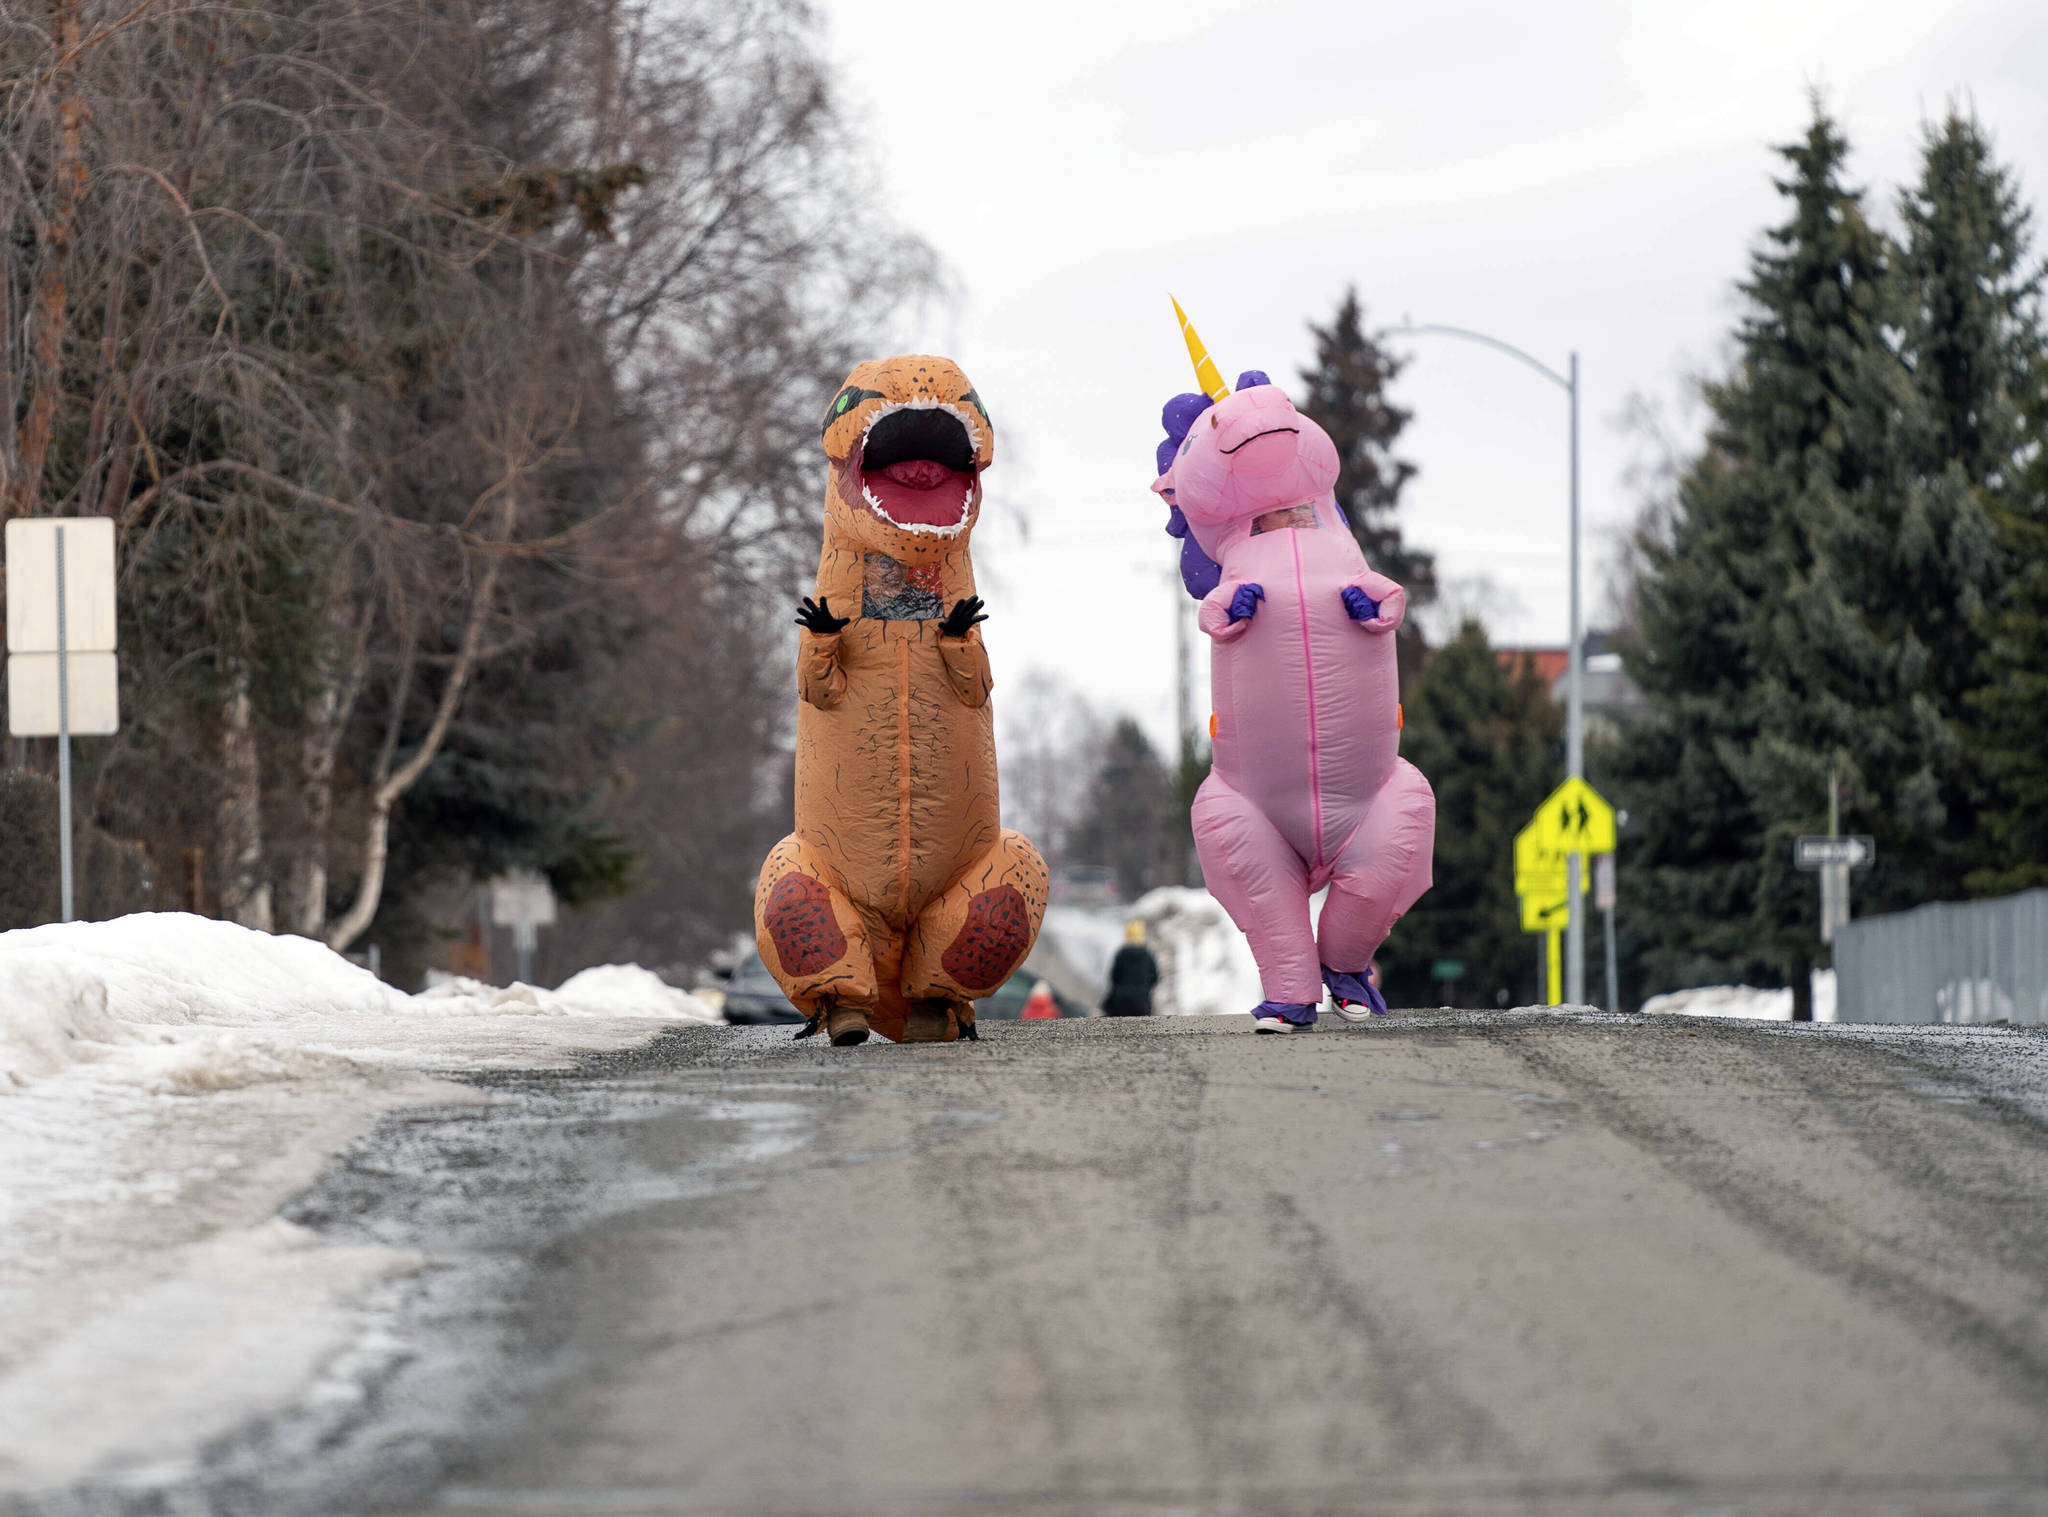 Christine Hohf, wearing a unicorn costume, right,and Andi Correa, wearing a dinosaur costume, walk through South Addition, Wednesday, March 25, 2020 in Anchorage. Hohf, who works as a scrub tech at a surgery center, said her hours were cut due to elective surgeries being put off because of the coronavirus pandemic, and she wanted to do something that would make people smile. (Loren Holmes/Anchorage Daily News via AP)